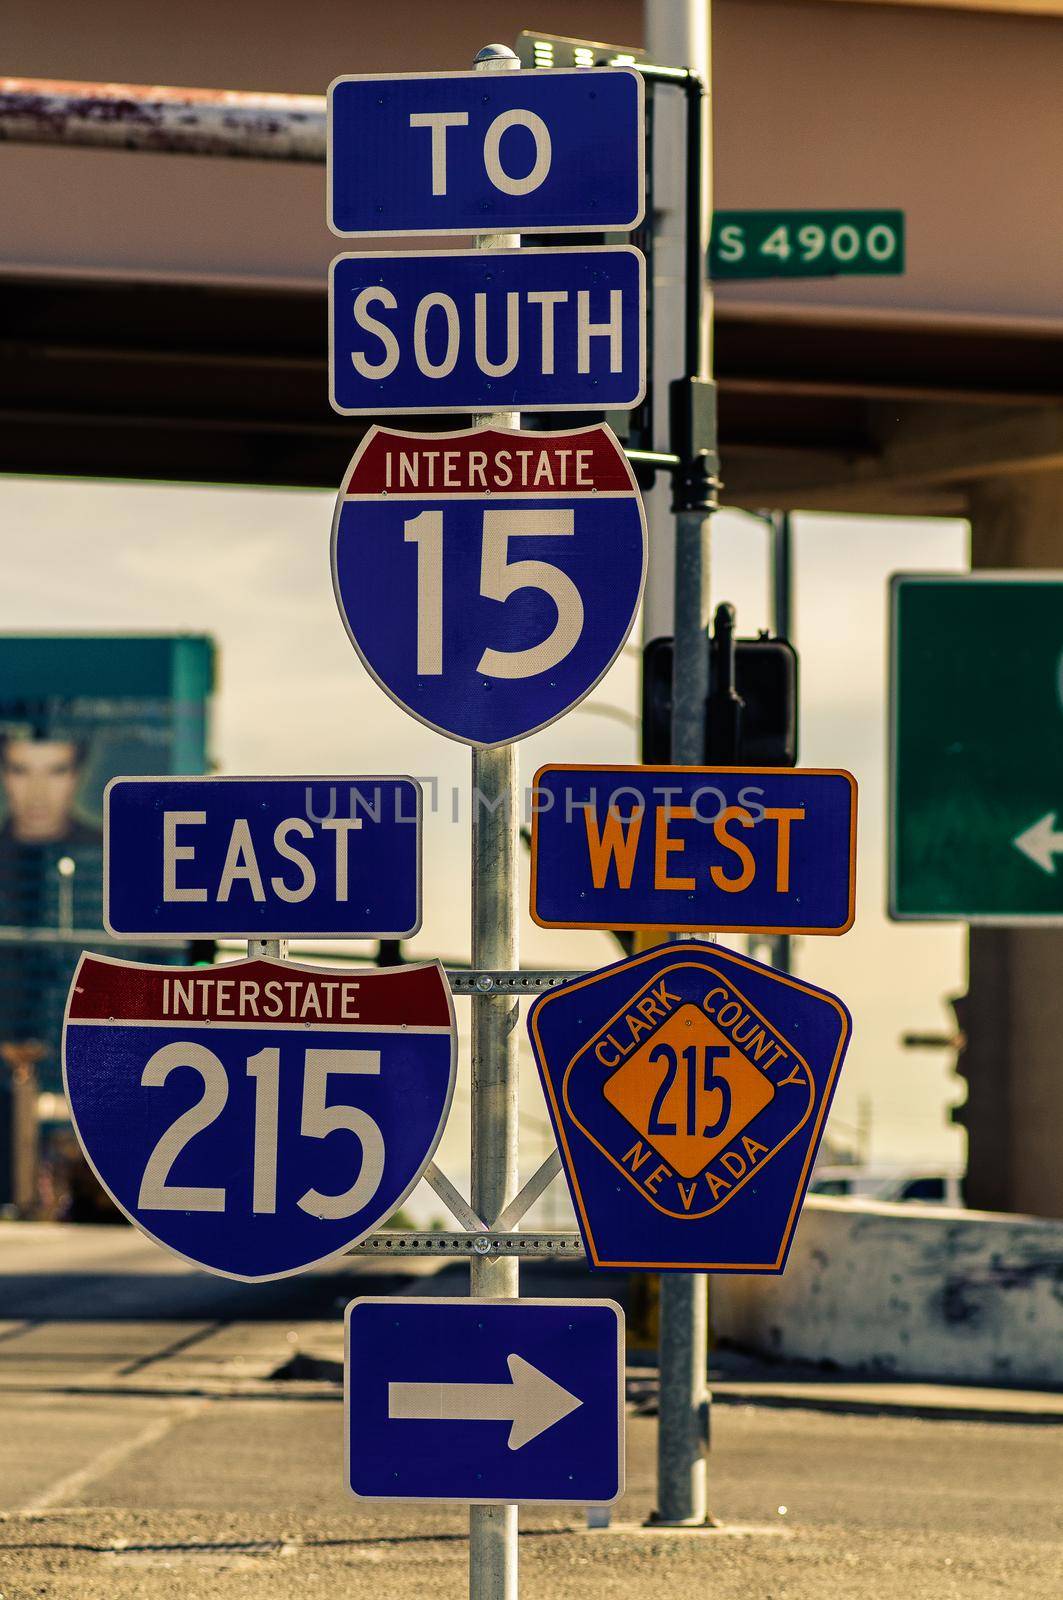 The Interstate Highway Signs USA. South east west signs on the road.